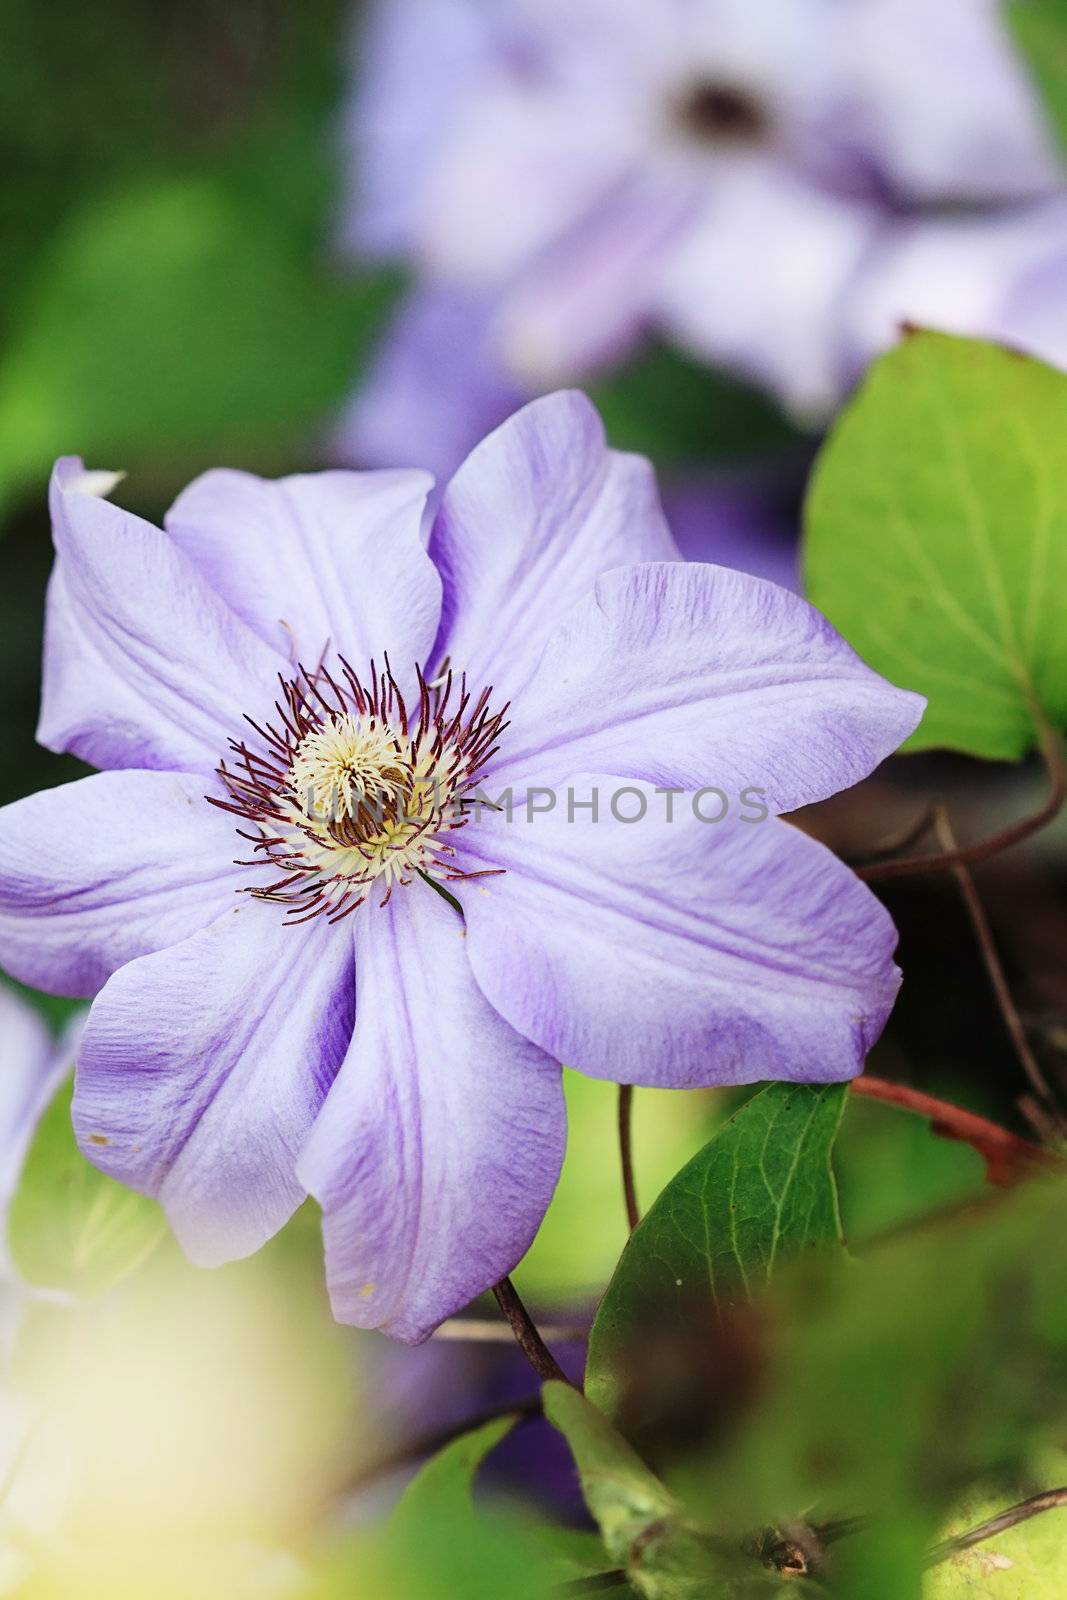 Macro of a violet clematis with extreme shallow depth of field.

